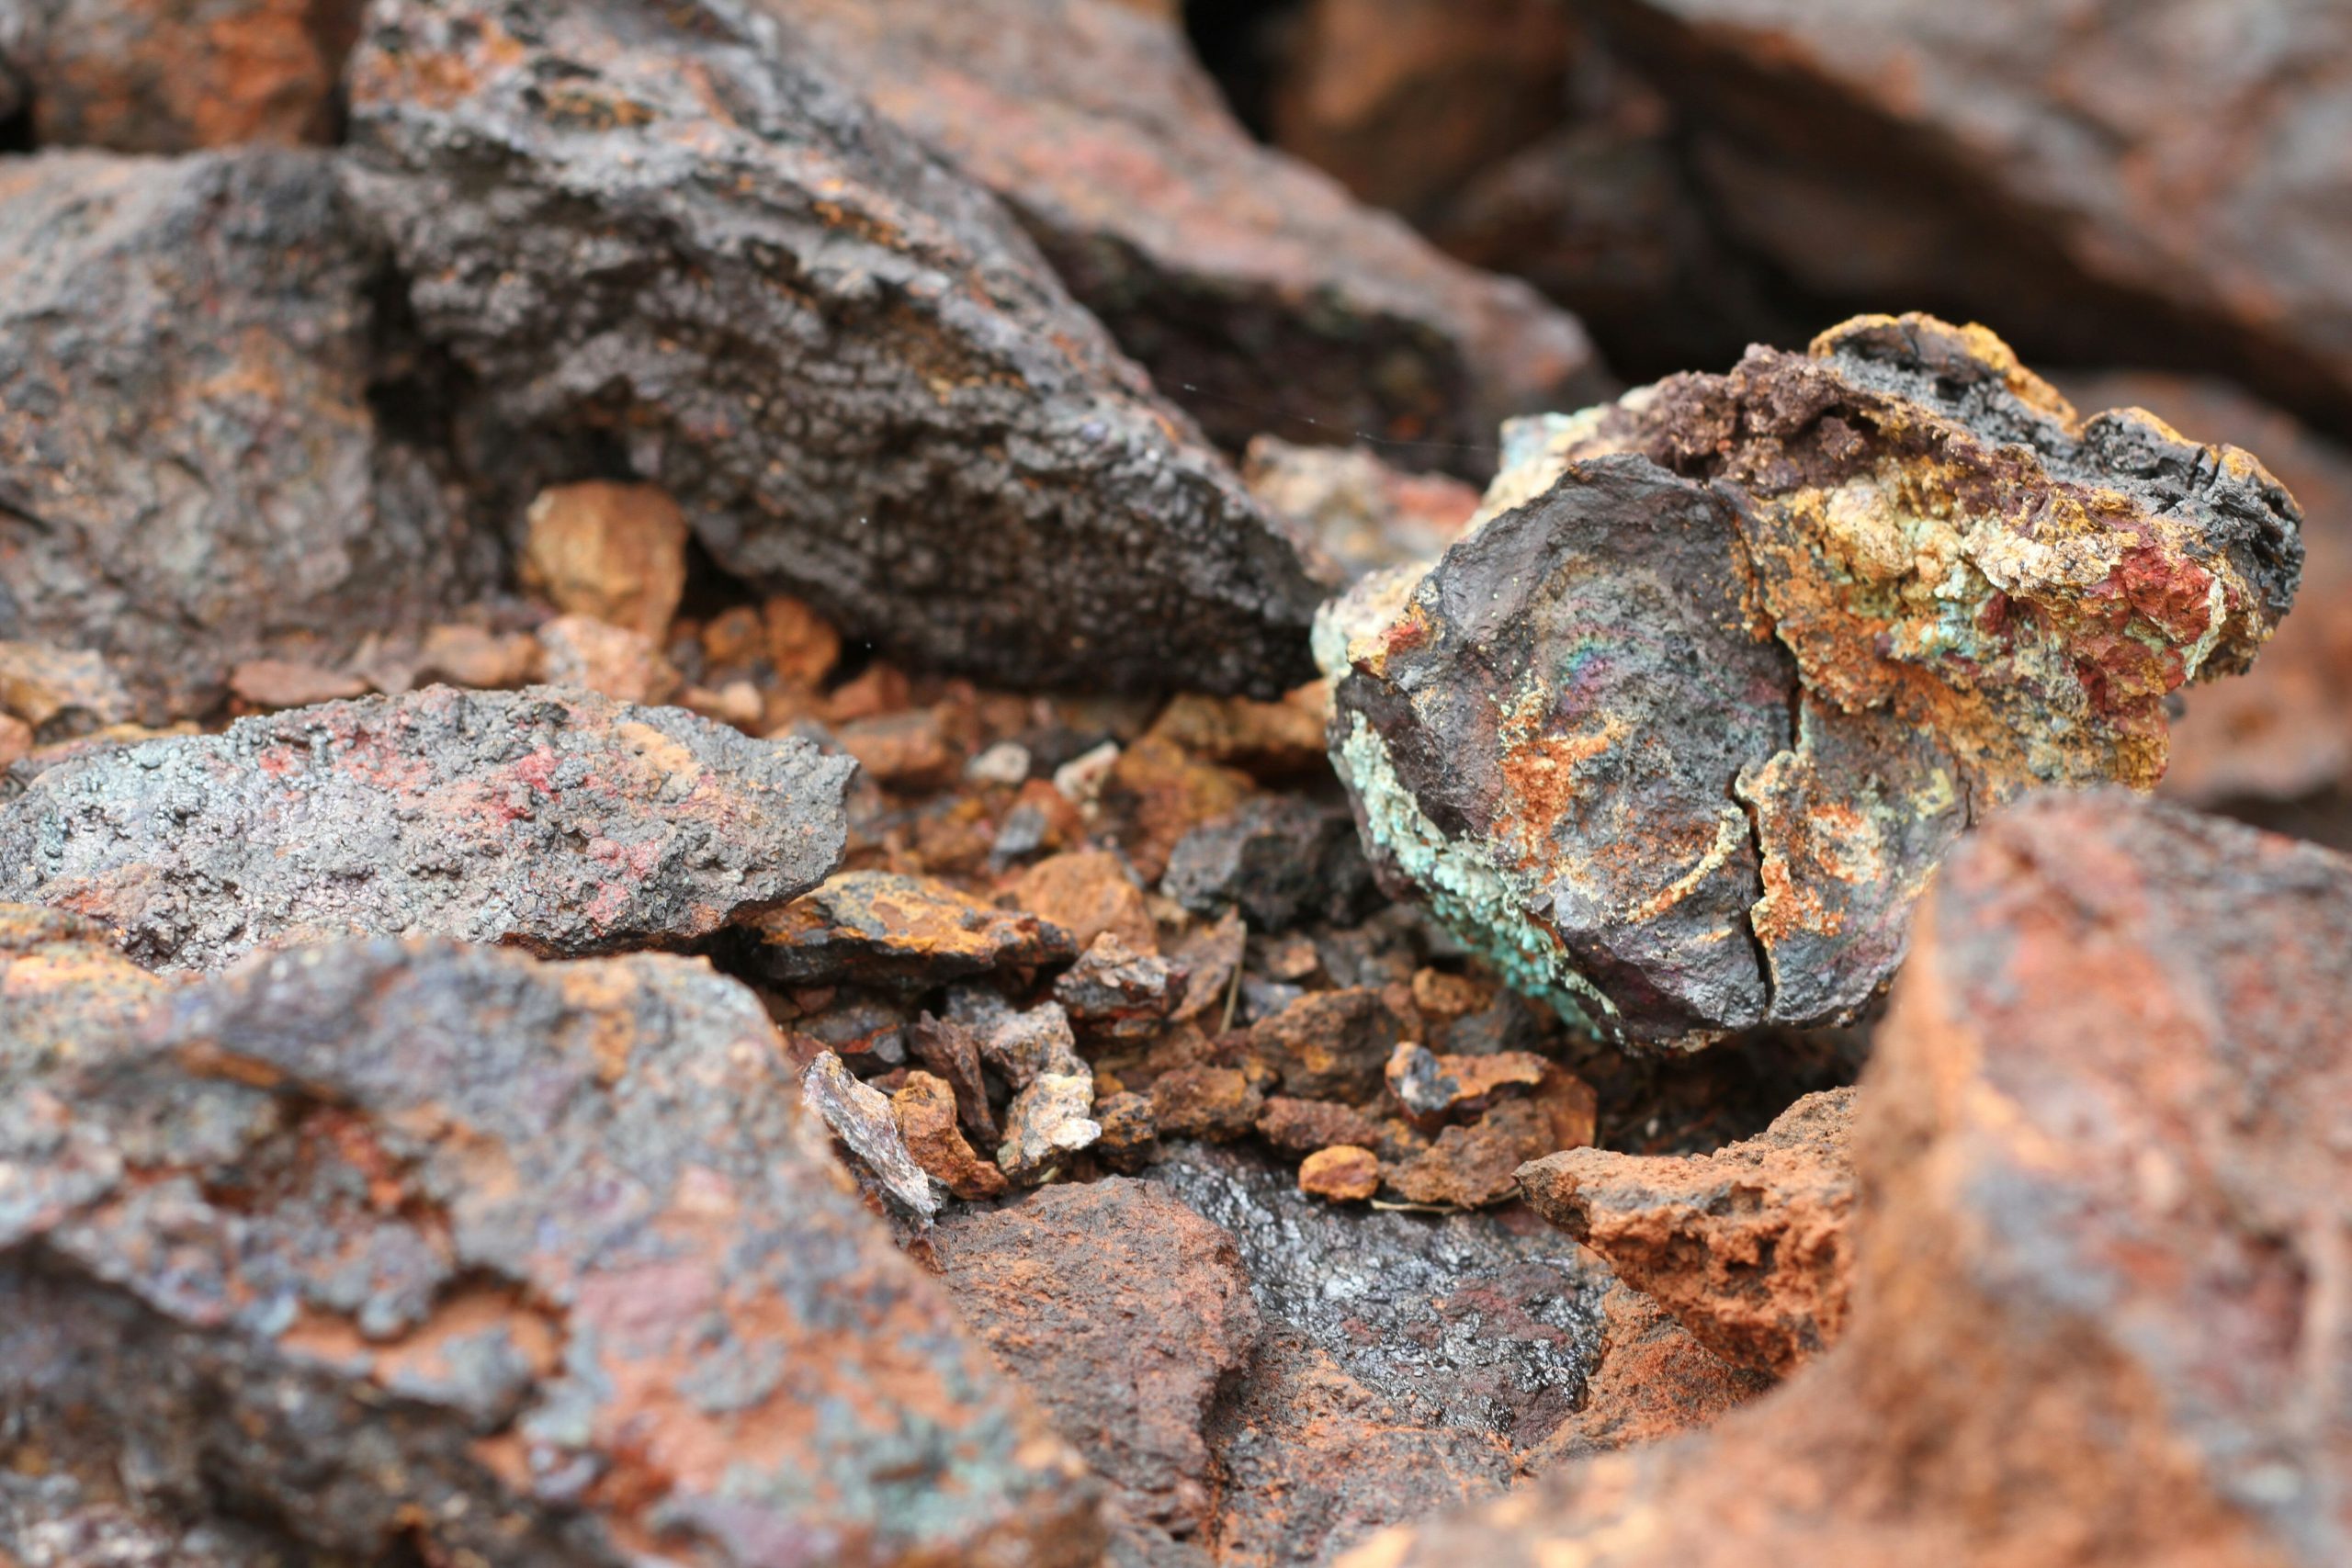 Image shows Ore containing nickel, cobalt and copper.